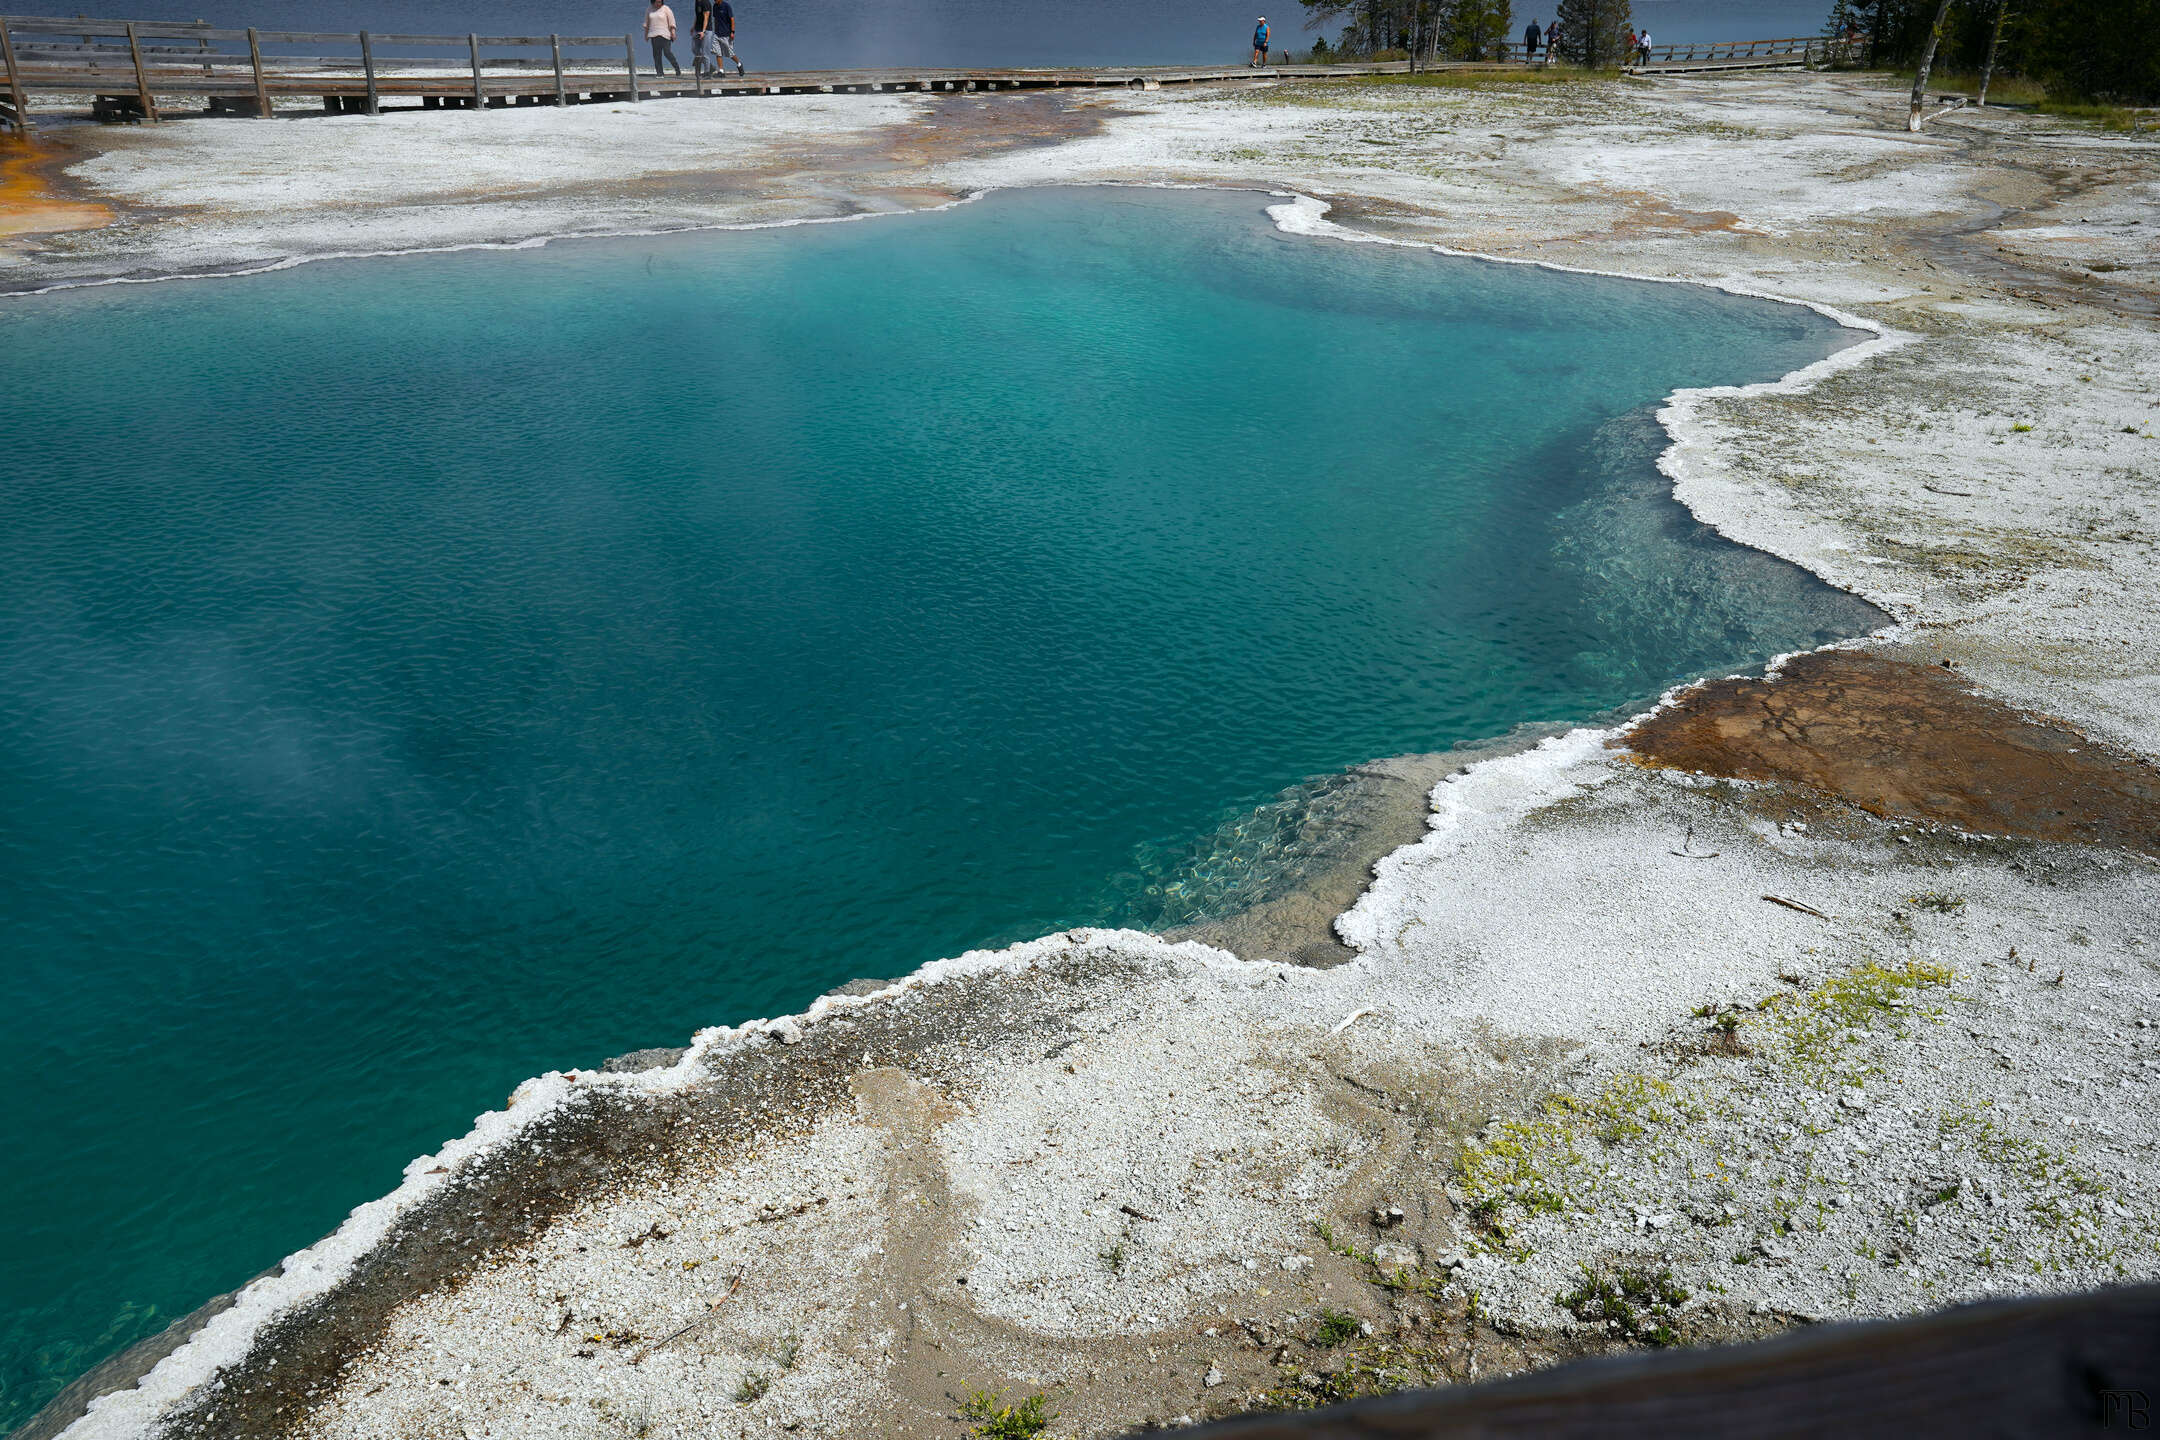 Very vibrant blue hot spring at Yellowstone